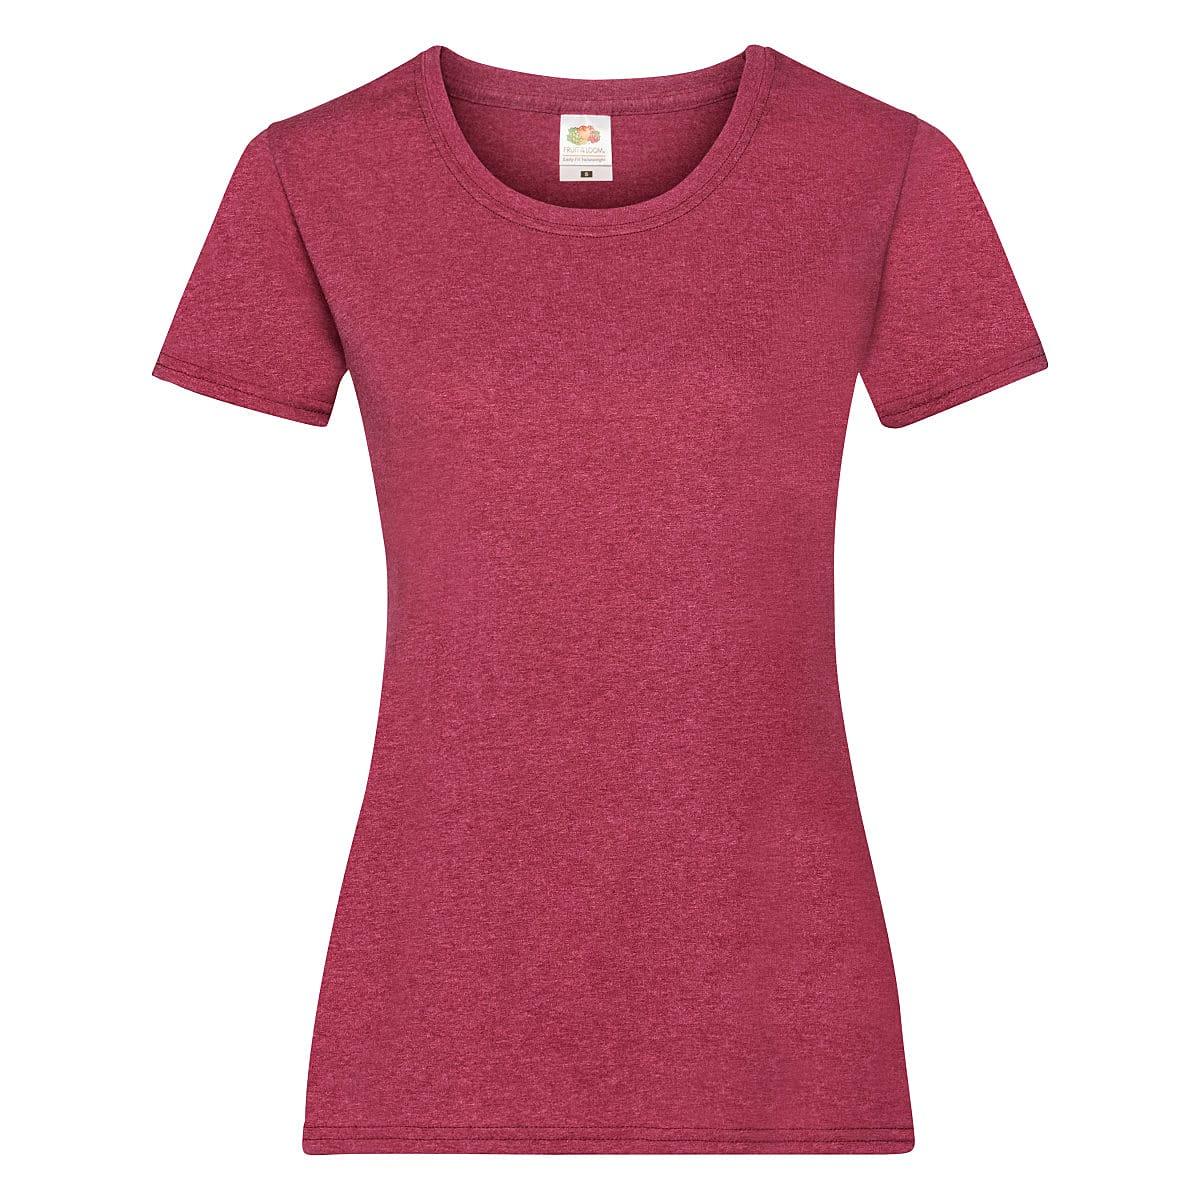 Fruit Of The Loom Lady-Fit Valueweight T-Shirt in Vintage Heather Red (Product Code: 61372)